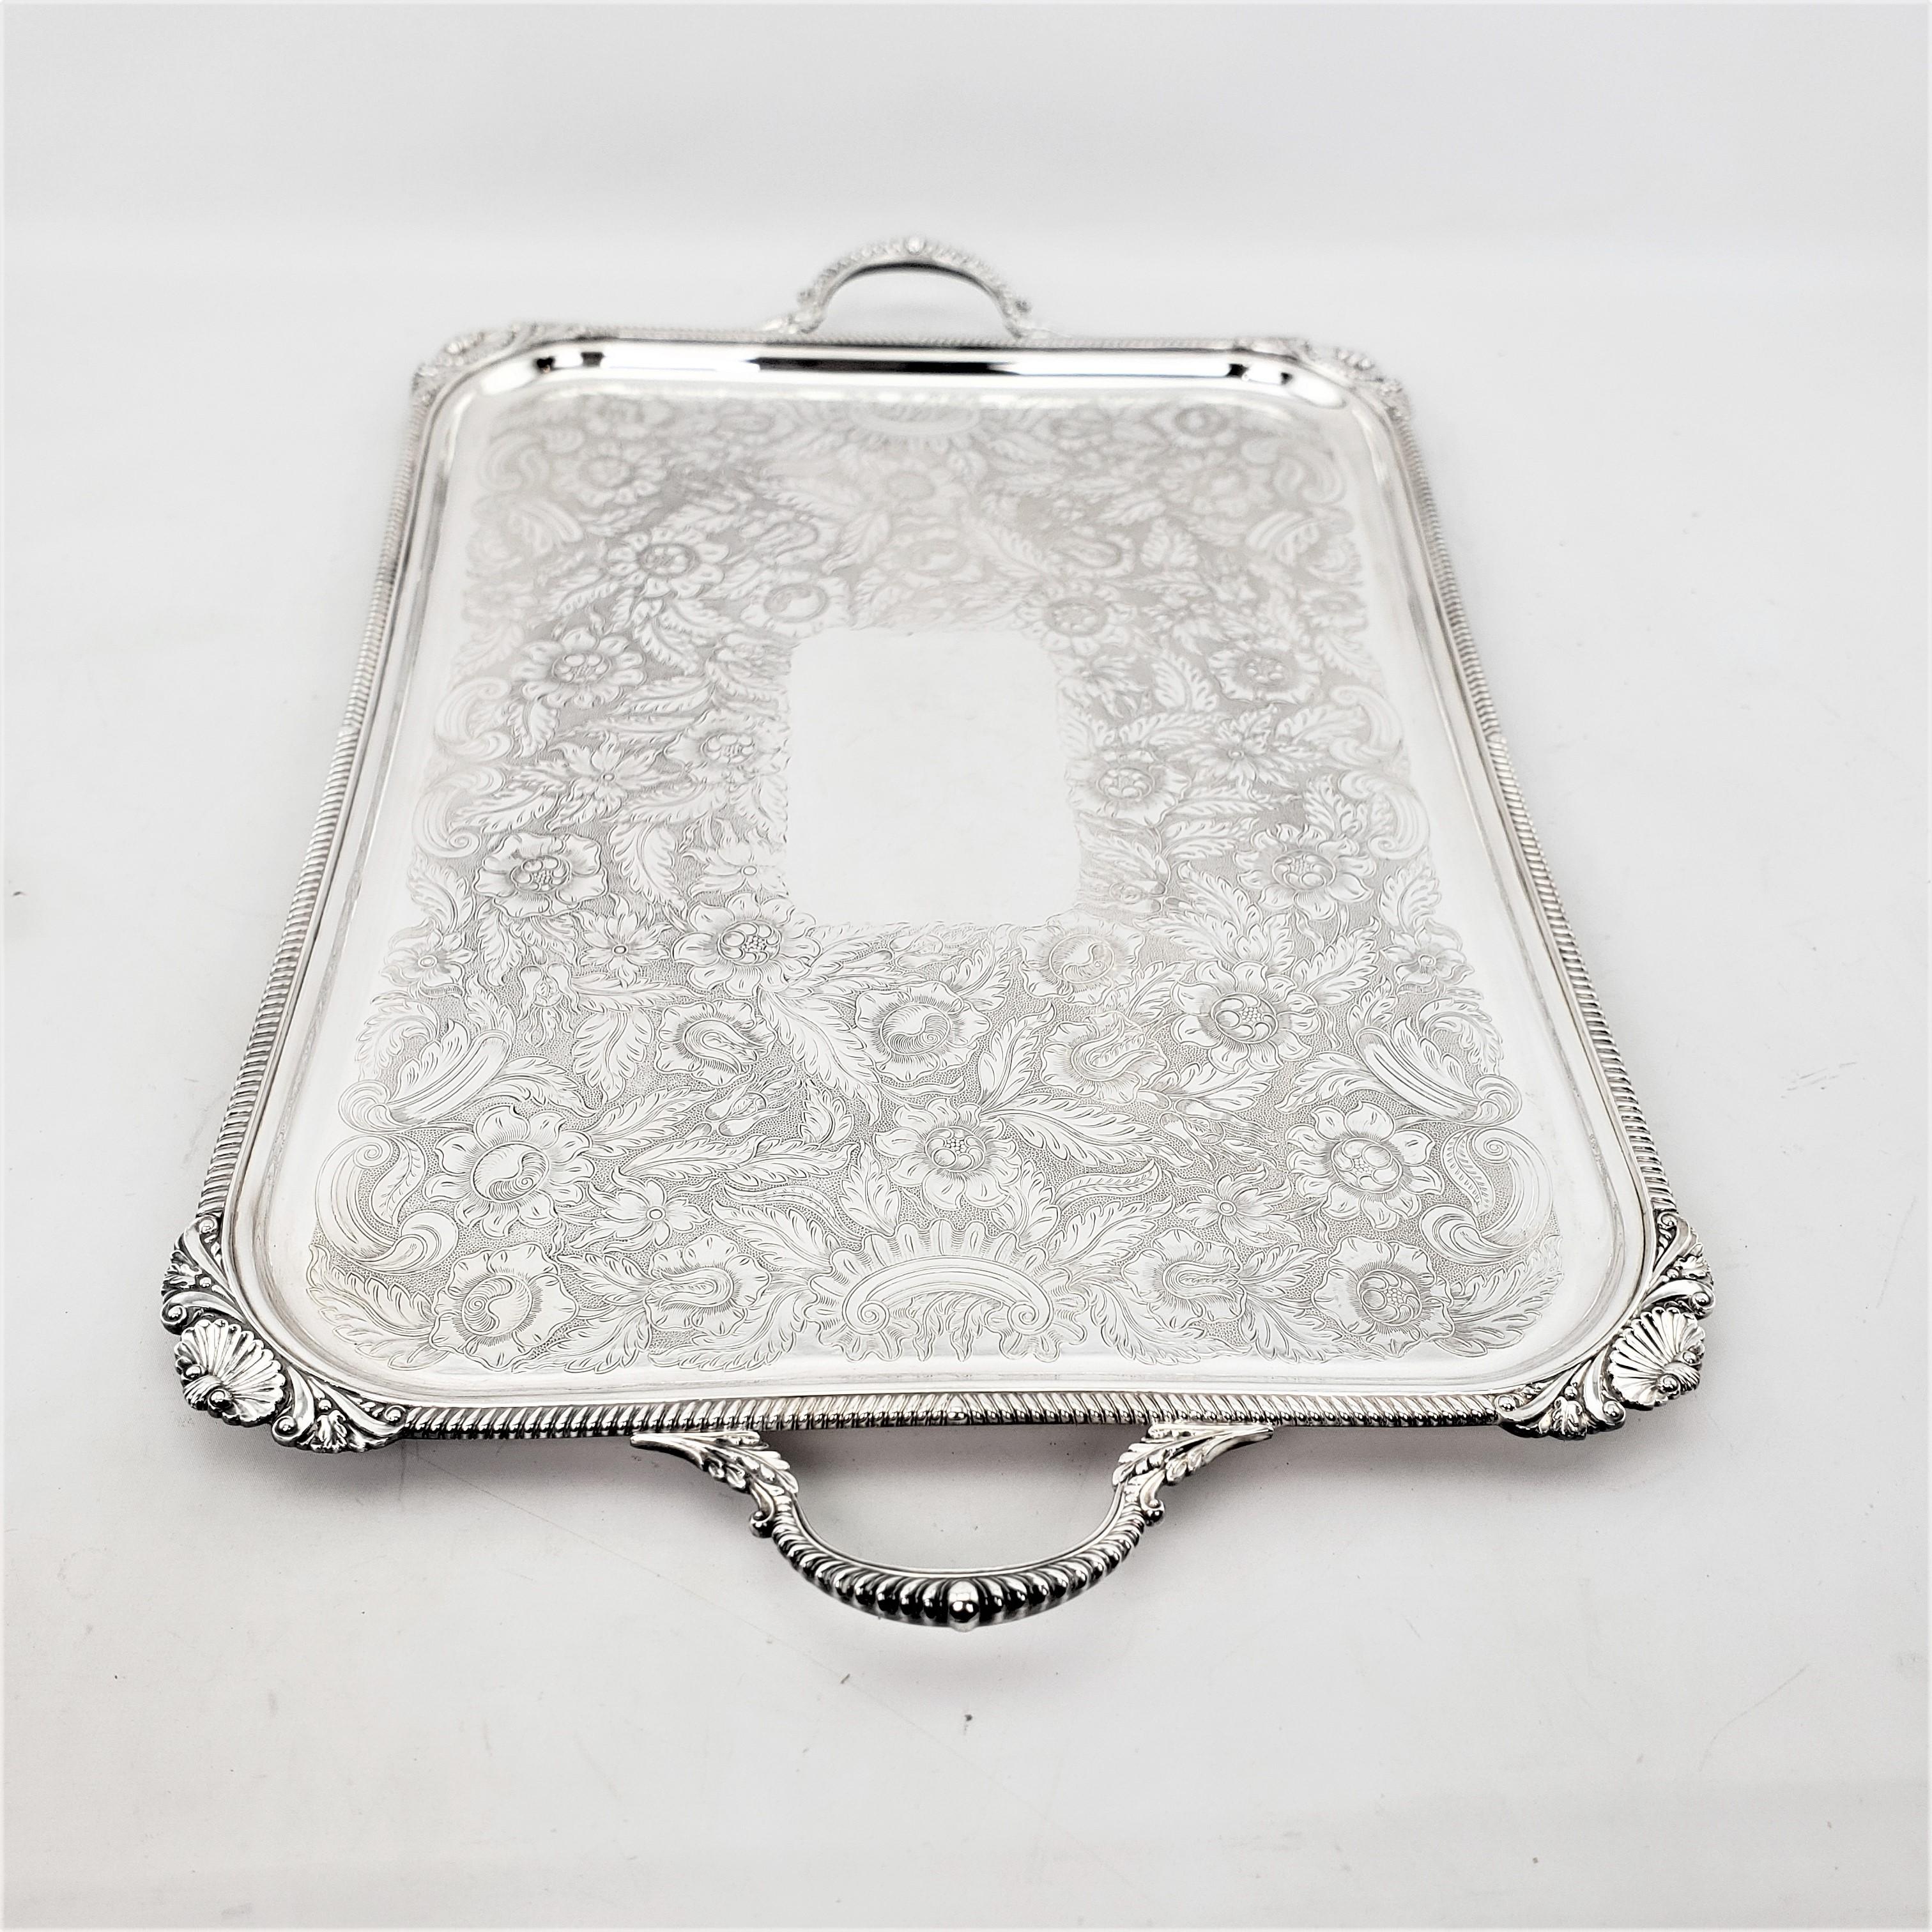 American Antique Birks Large Silver Plated Rectangular Serving Tray with Floral Engraving For Sale